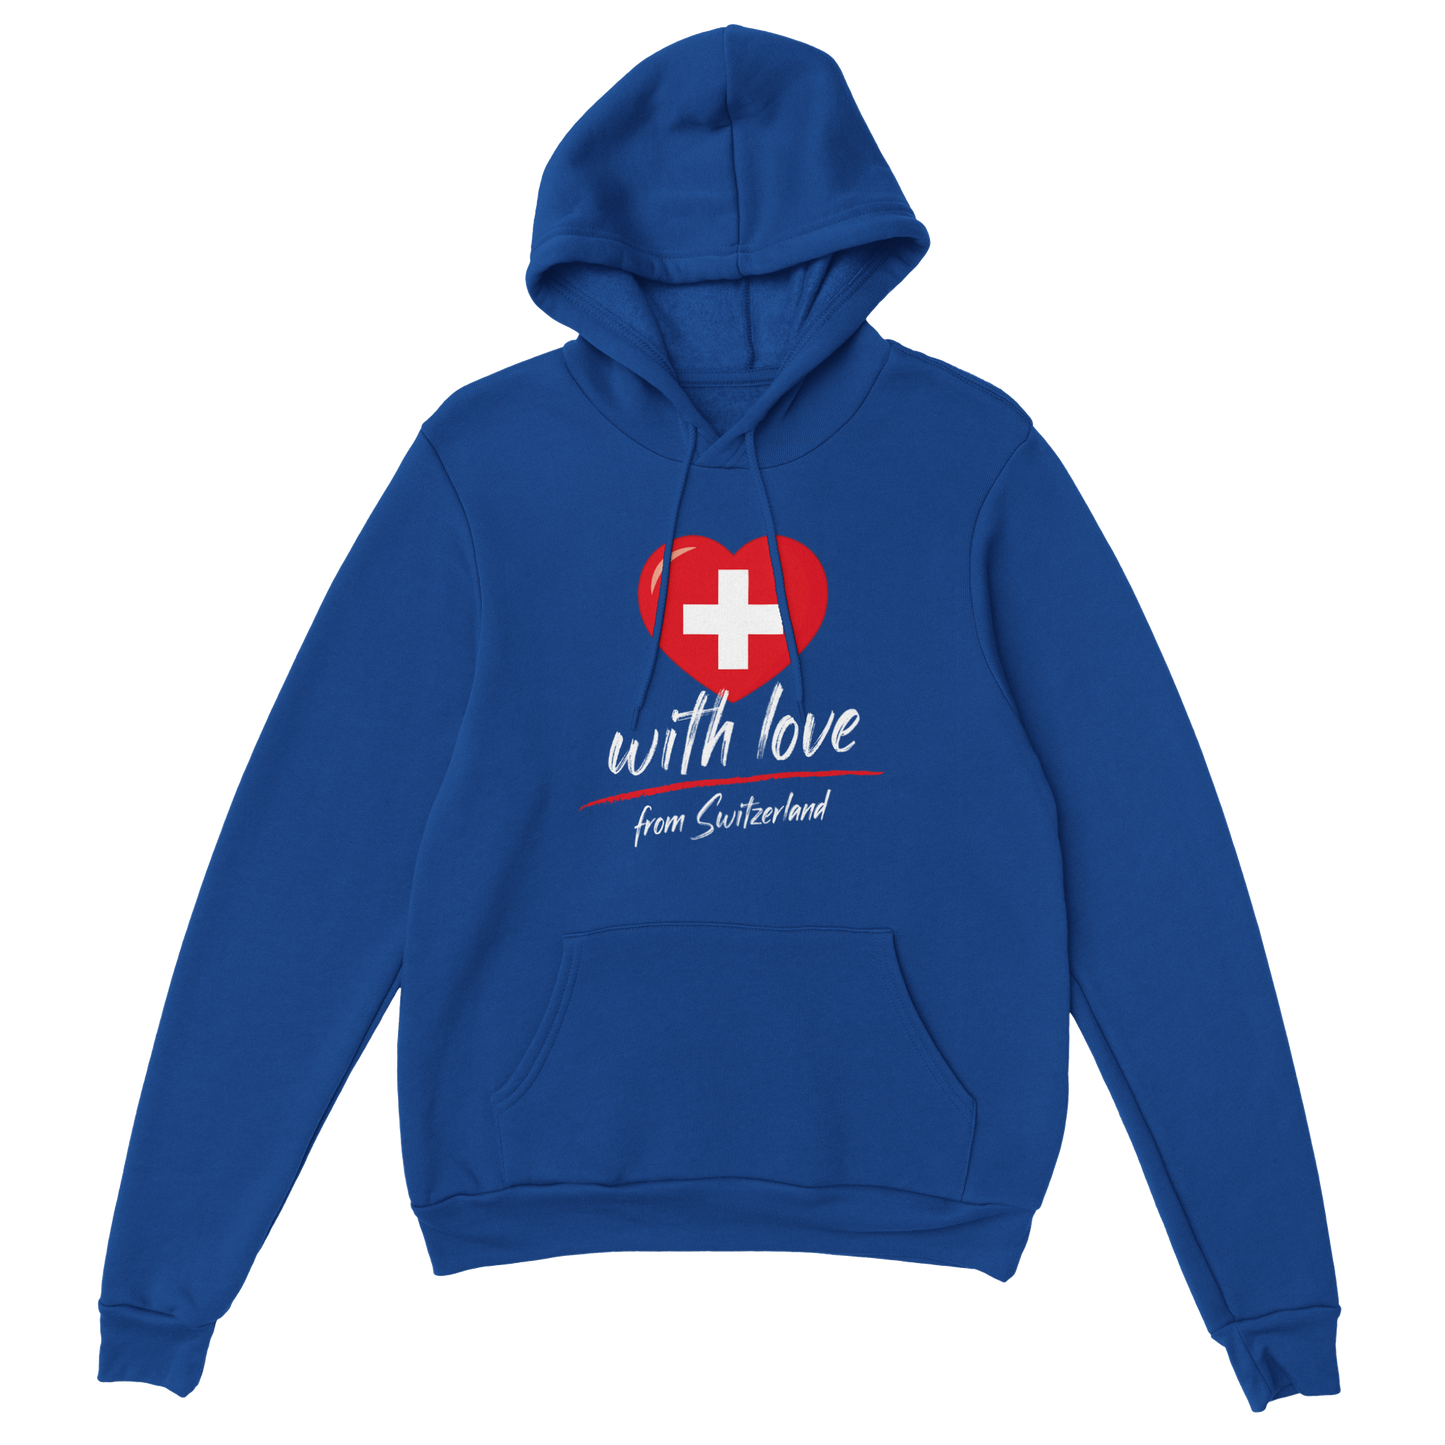 With love from Switzerland – Hoodie